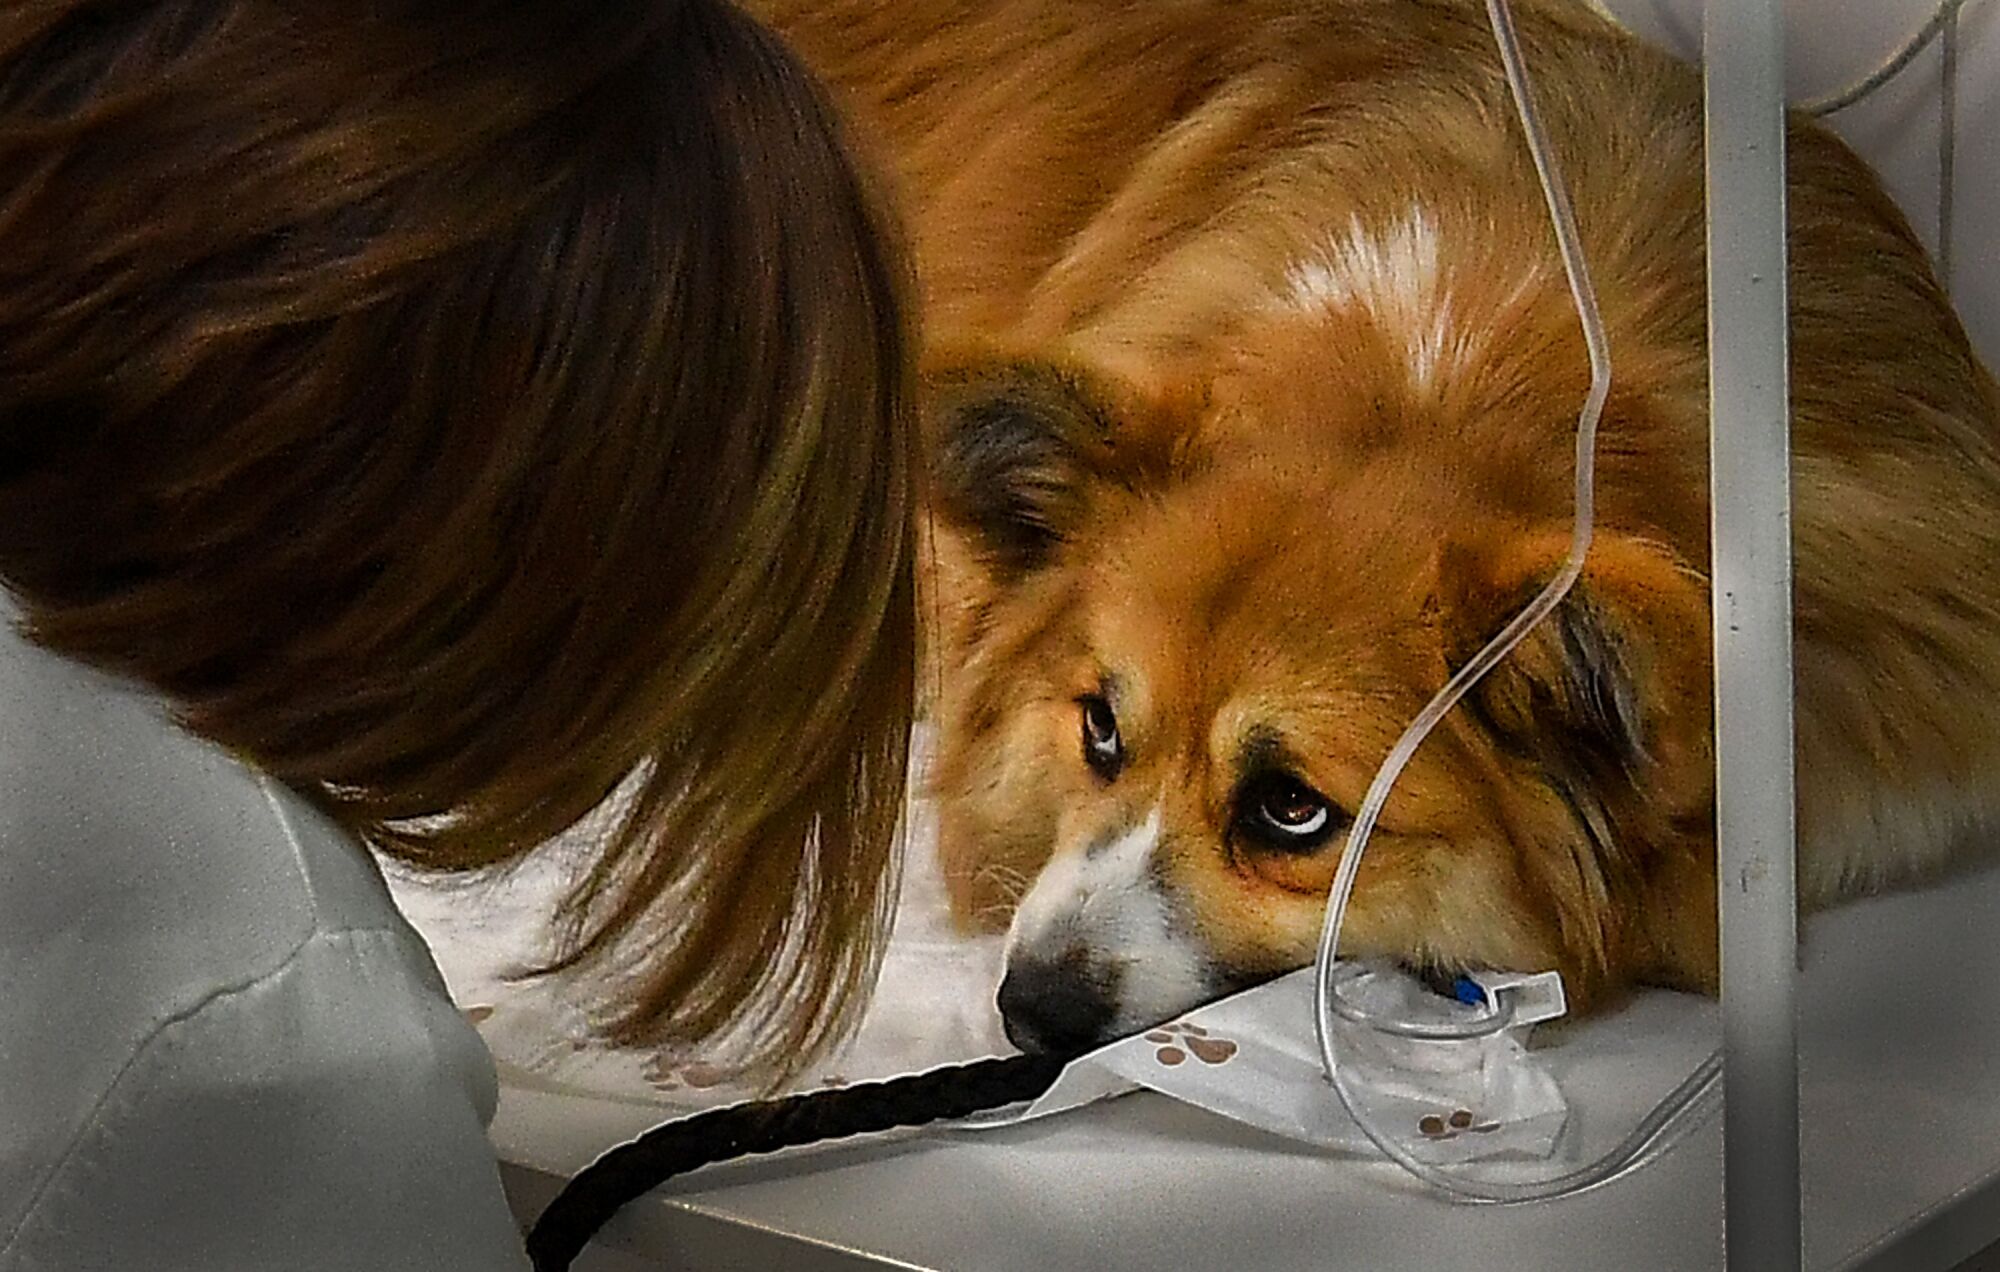 RUSSIA: A woman looks at her dog during a treatment procedure at "ZooAcademy" veterinary clinic in Moscow on April 21, 2020, during a strict lockdown in Russia to stop the spread of the COVID-19 coronavirus.